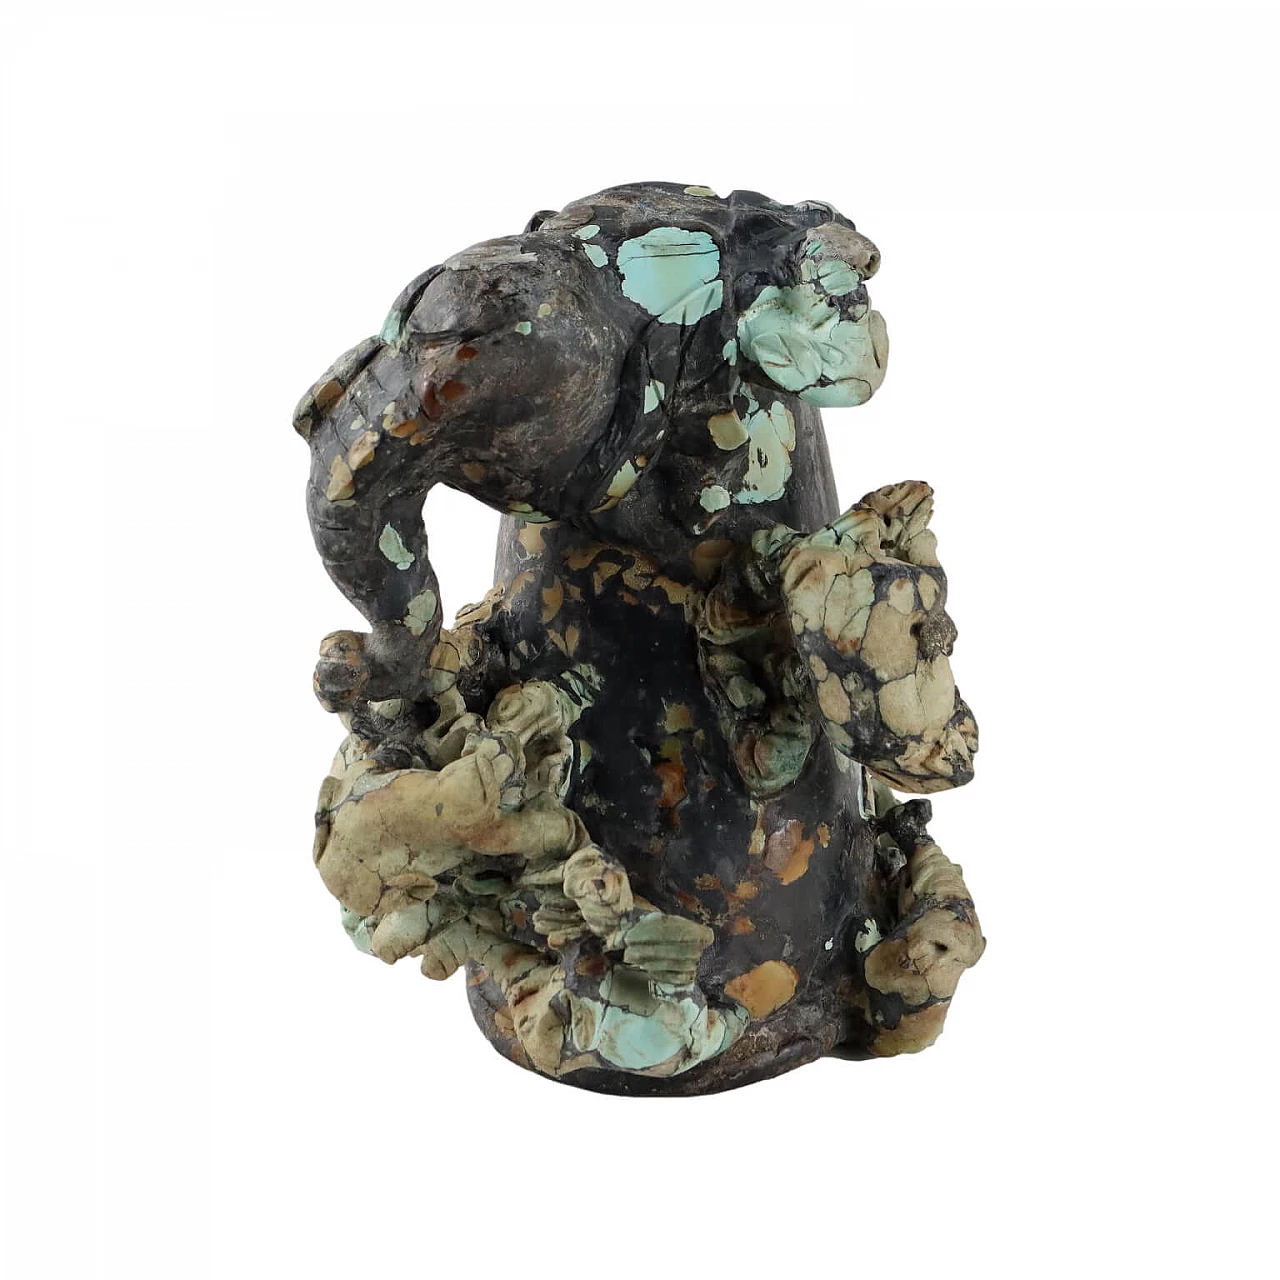 Chinese turquoise root sculpture of elephants and other animals 1